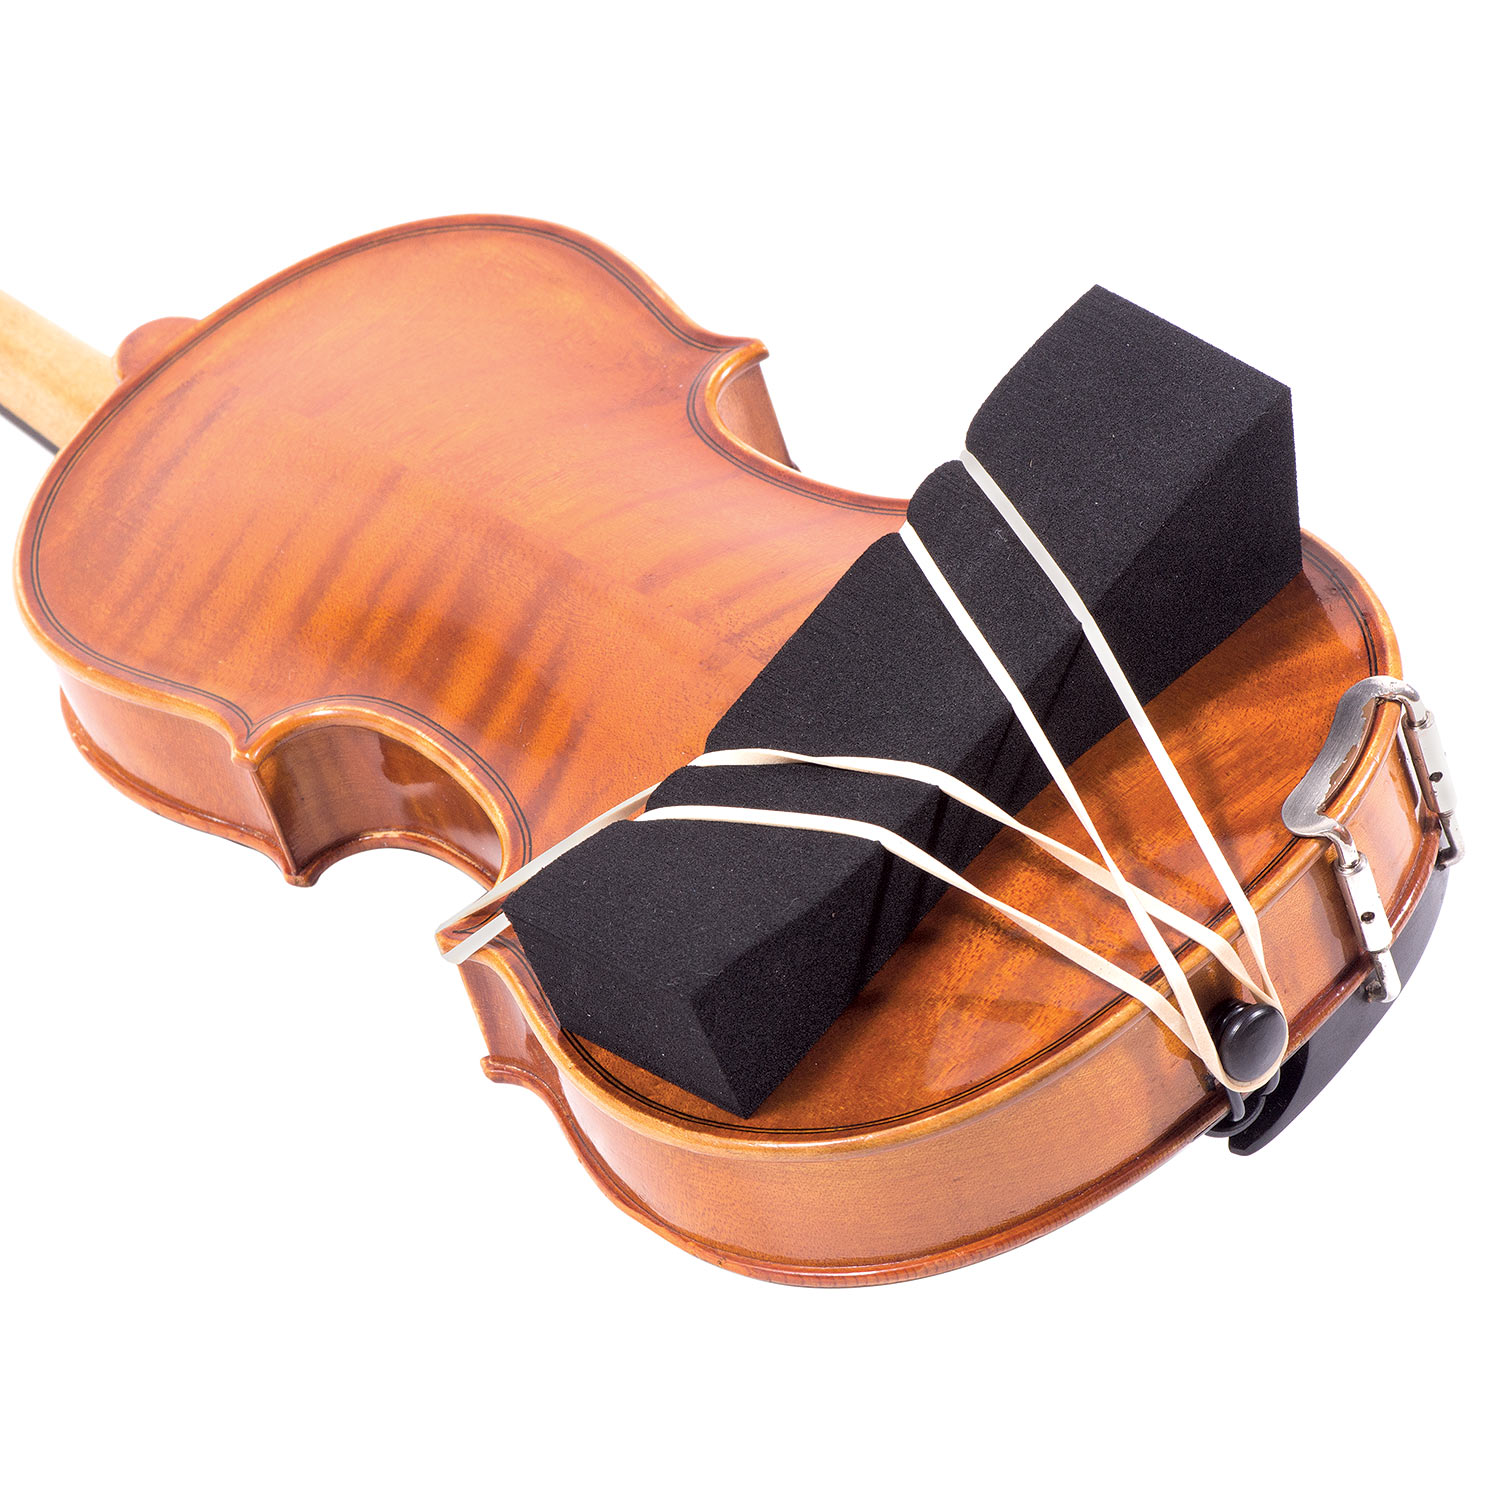 Retailery Toy Violin And Bow Plastic 1/8 Size 